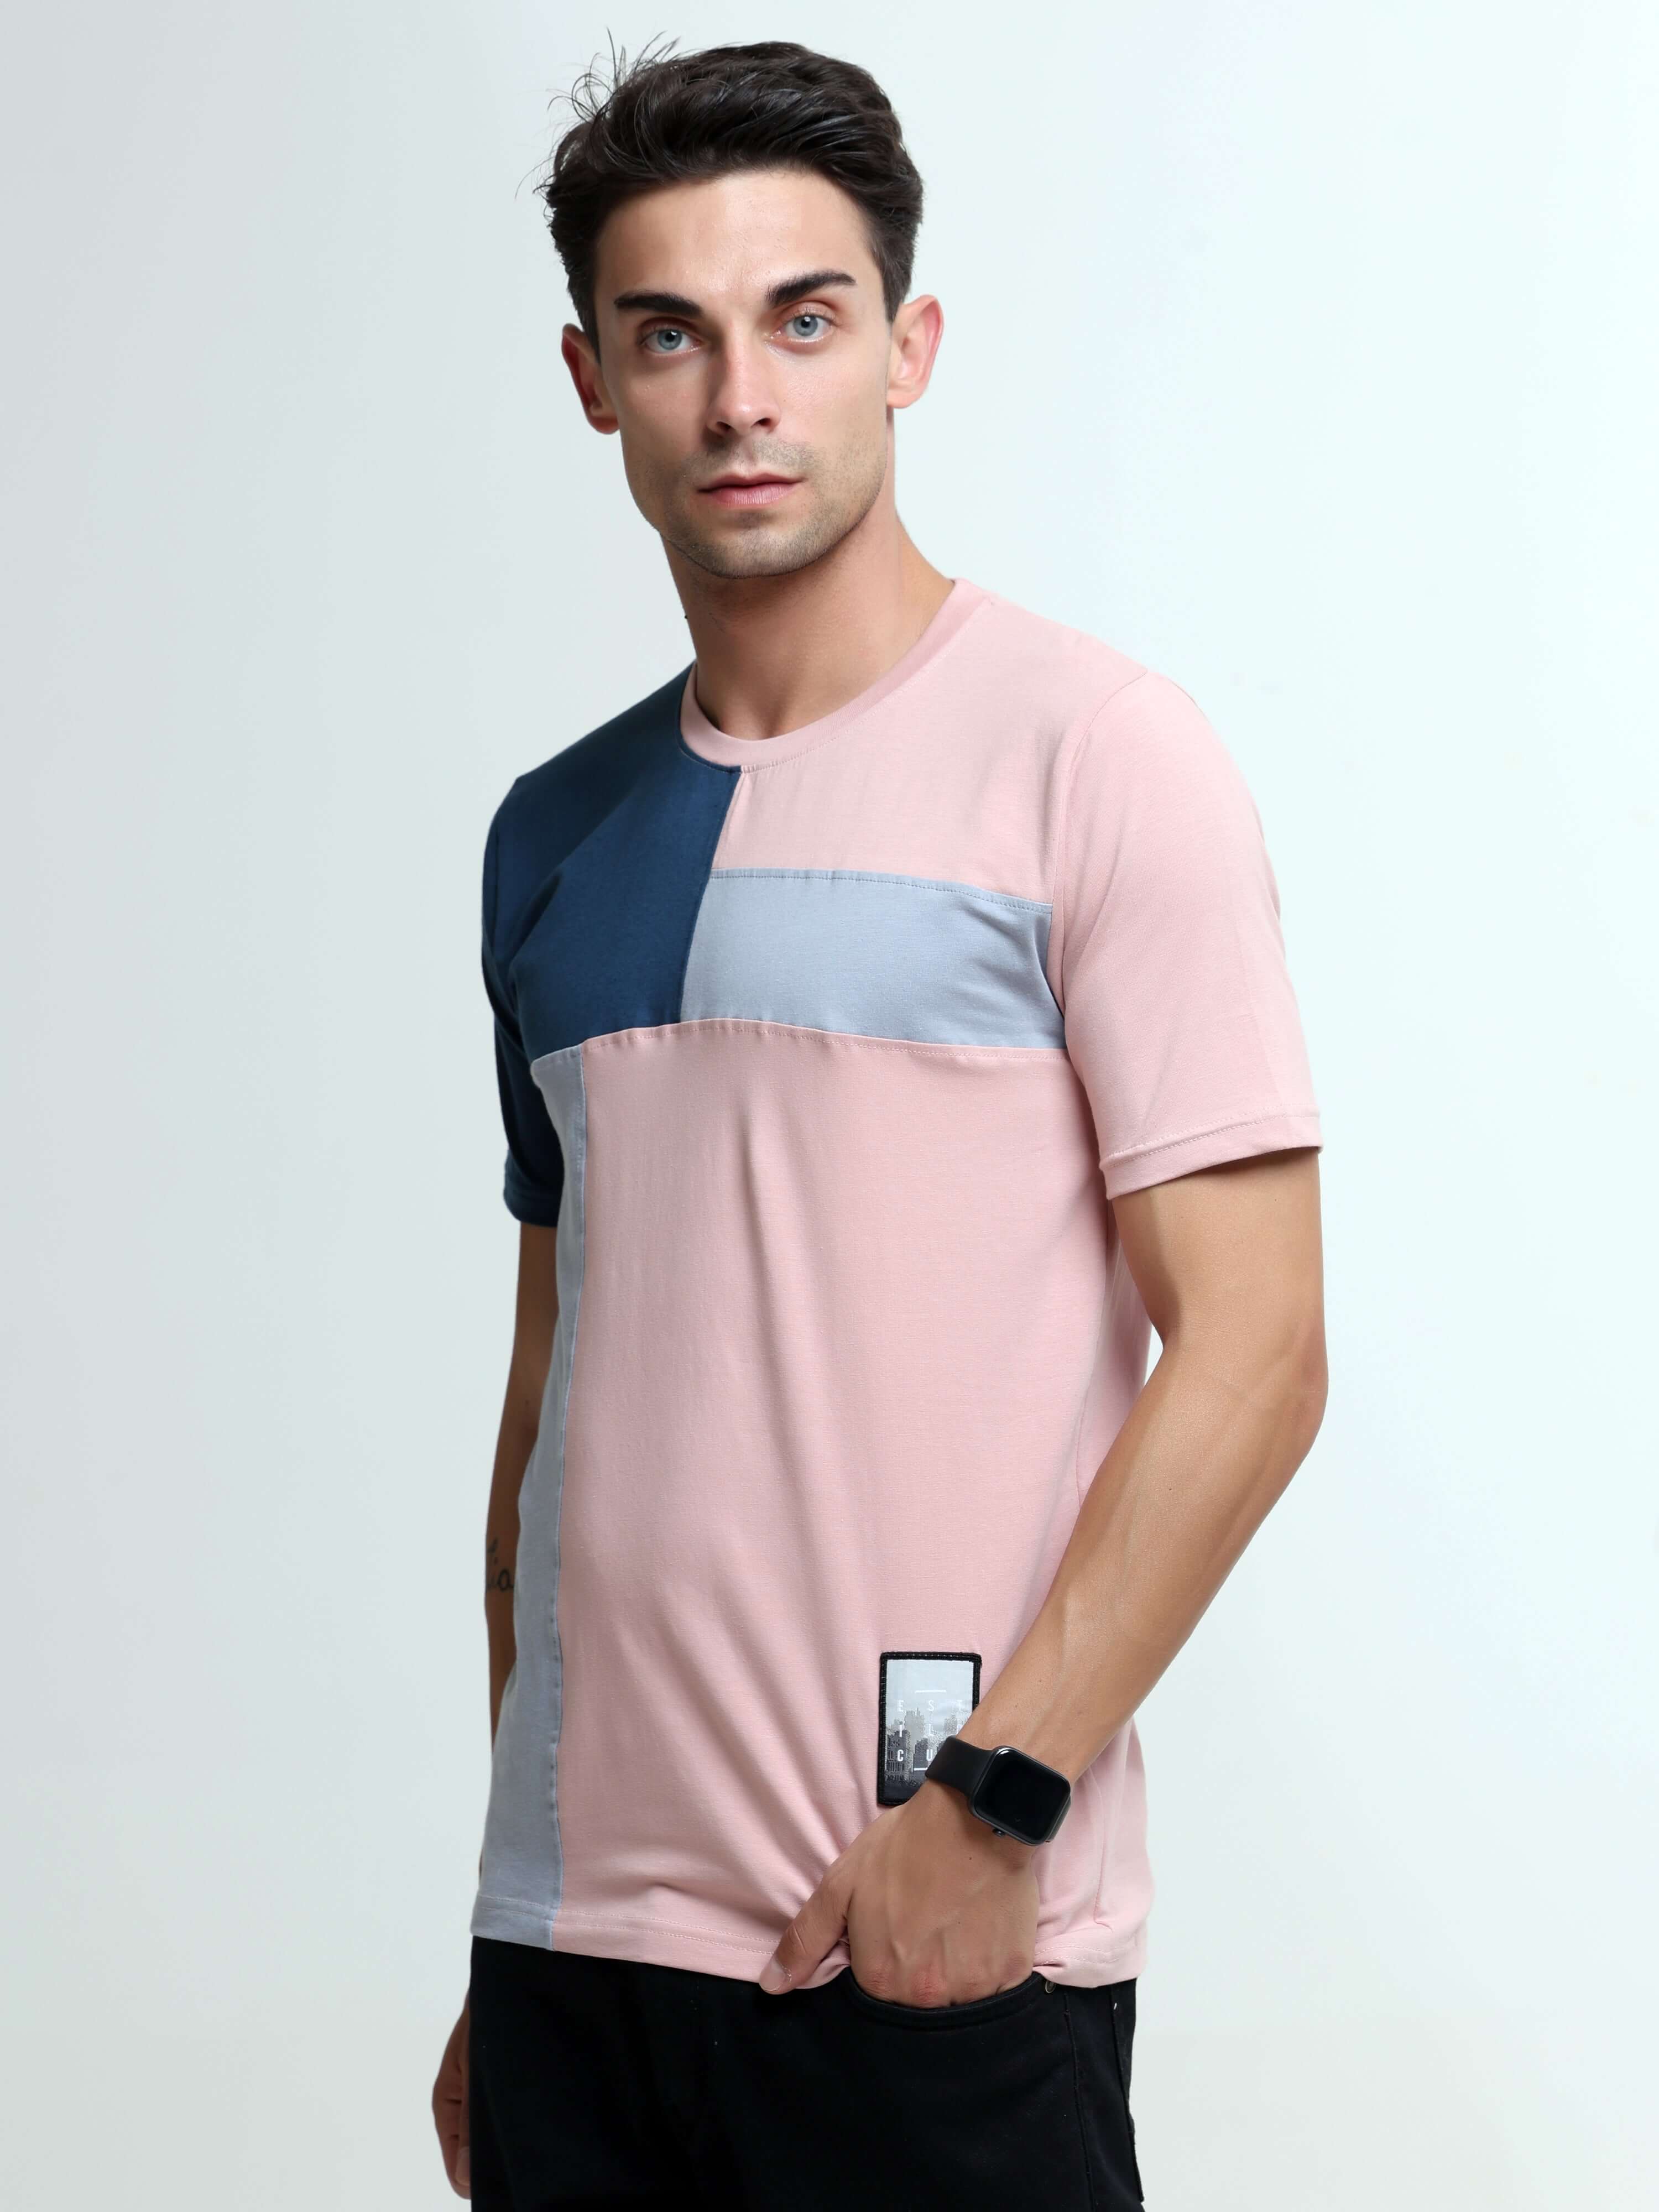 Blitz ash rose light weight tshirt shop online at Estilocus. This relax-fit Cut and Sew T-shirt is comfortable and the perfect essential all year round. Pair it with white jeans and sneakers and layer it up with a denim jacket for a casual and put-togethe